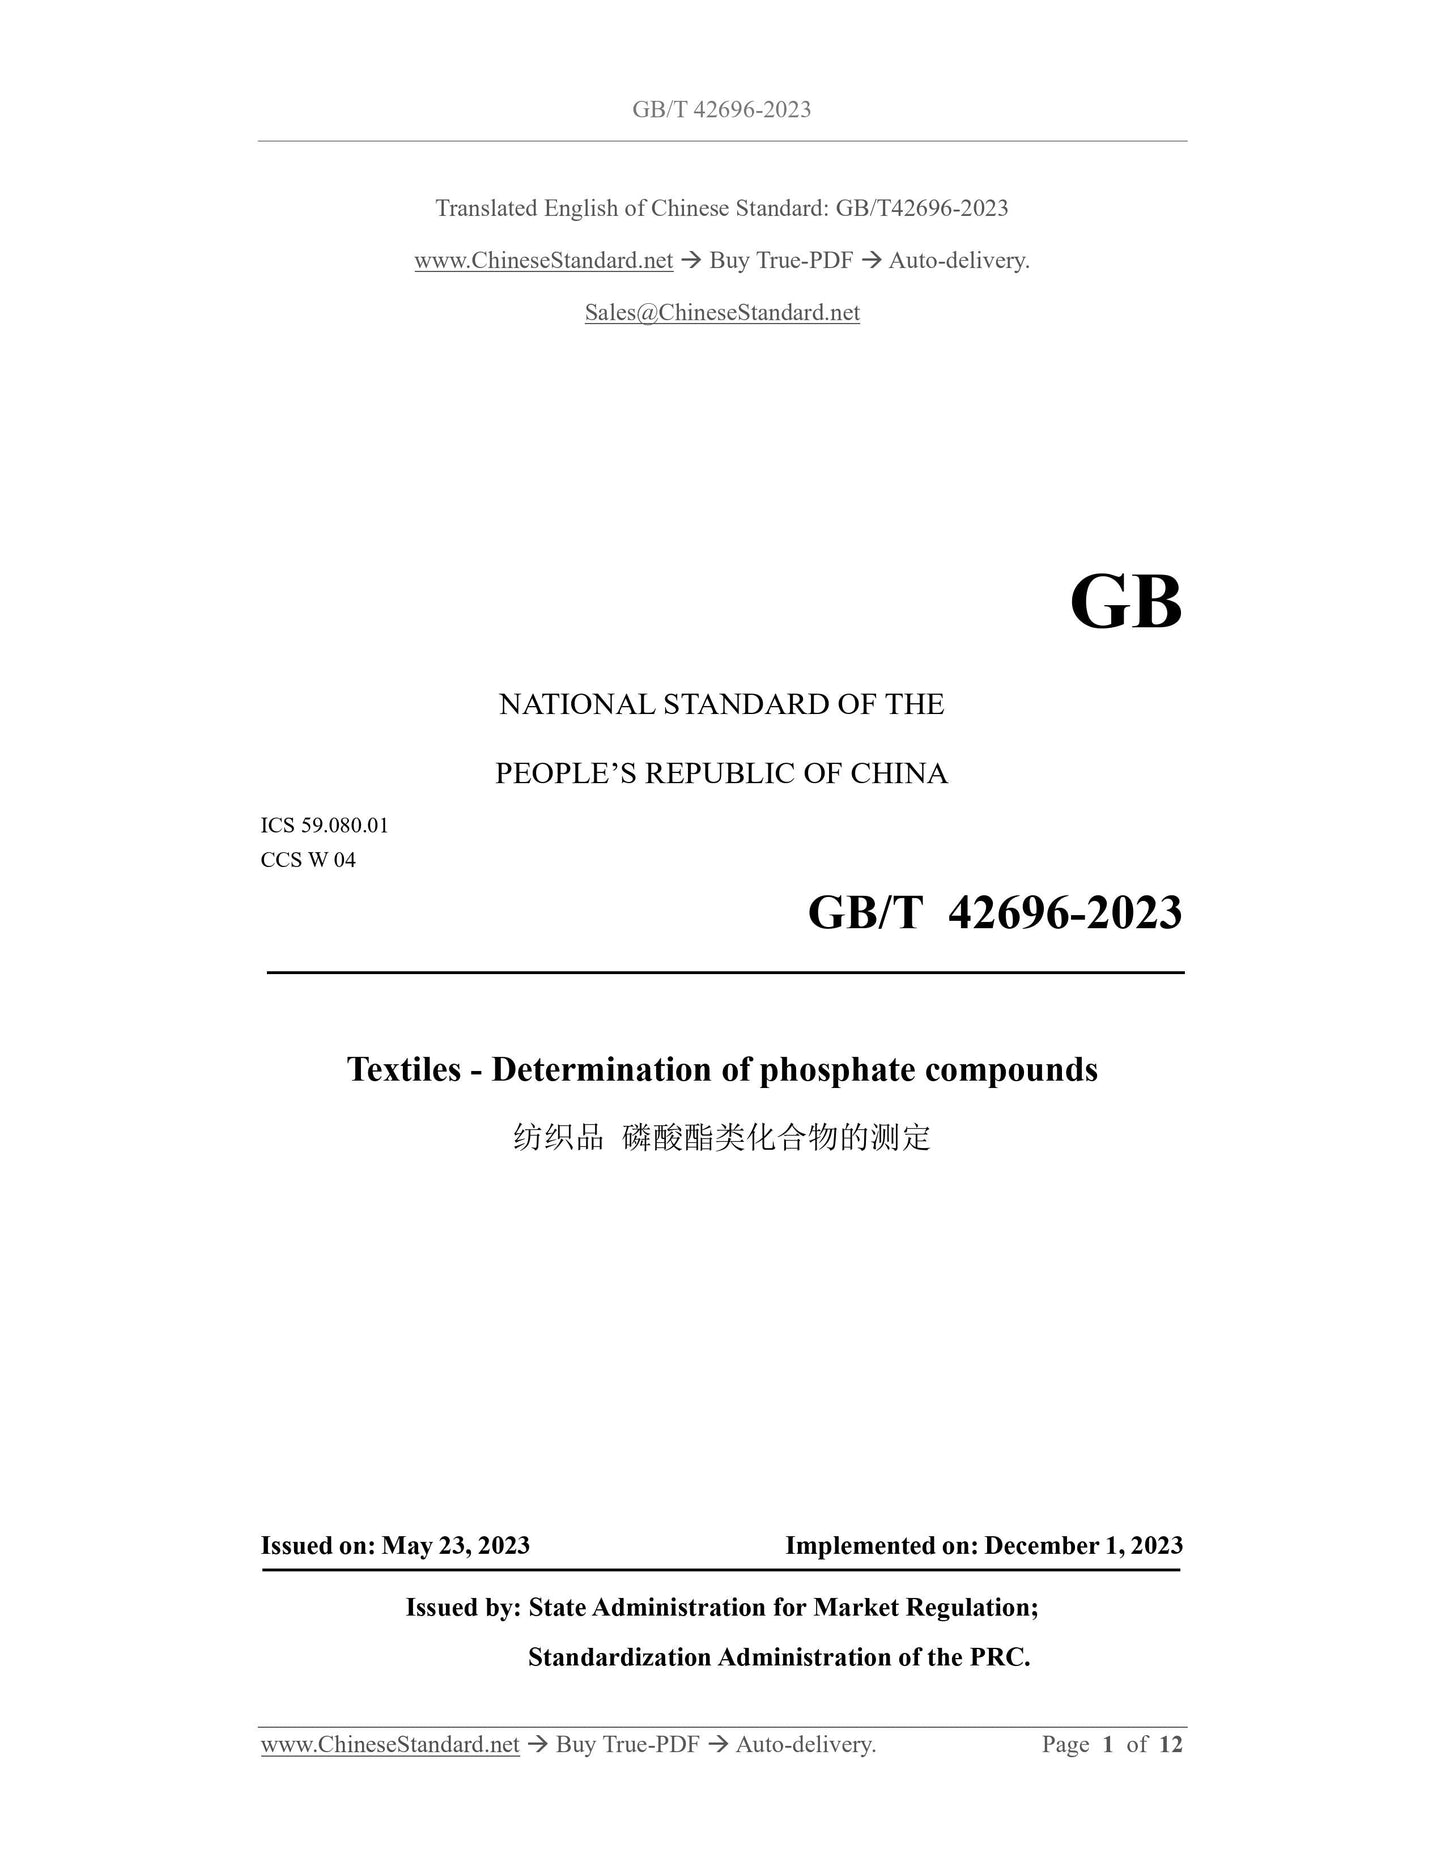 GB/T 42696-2023 Page 1